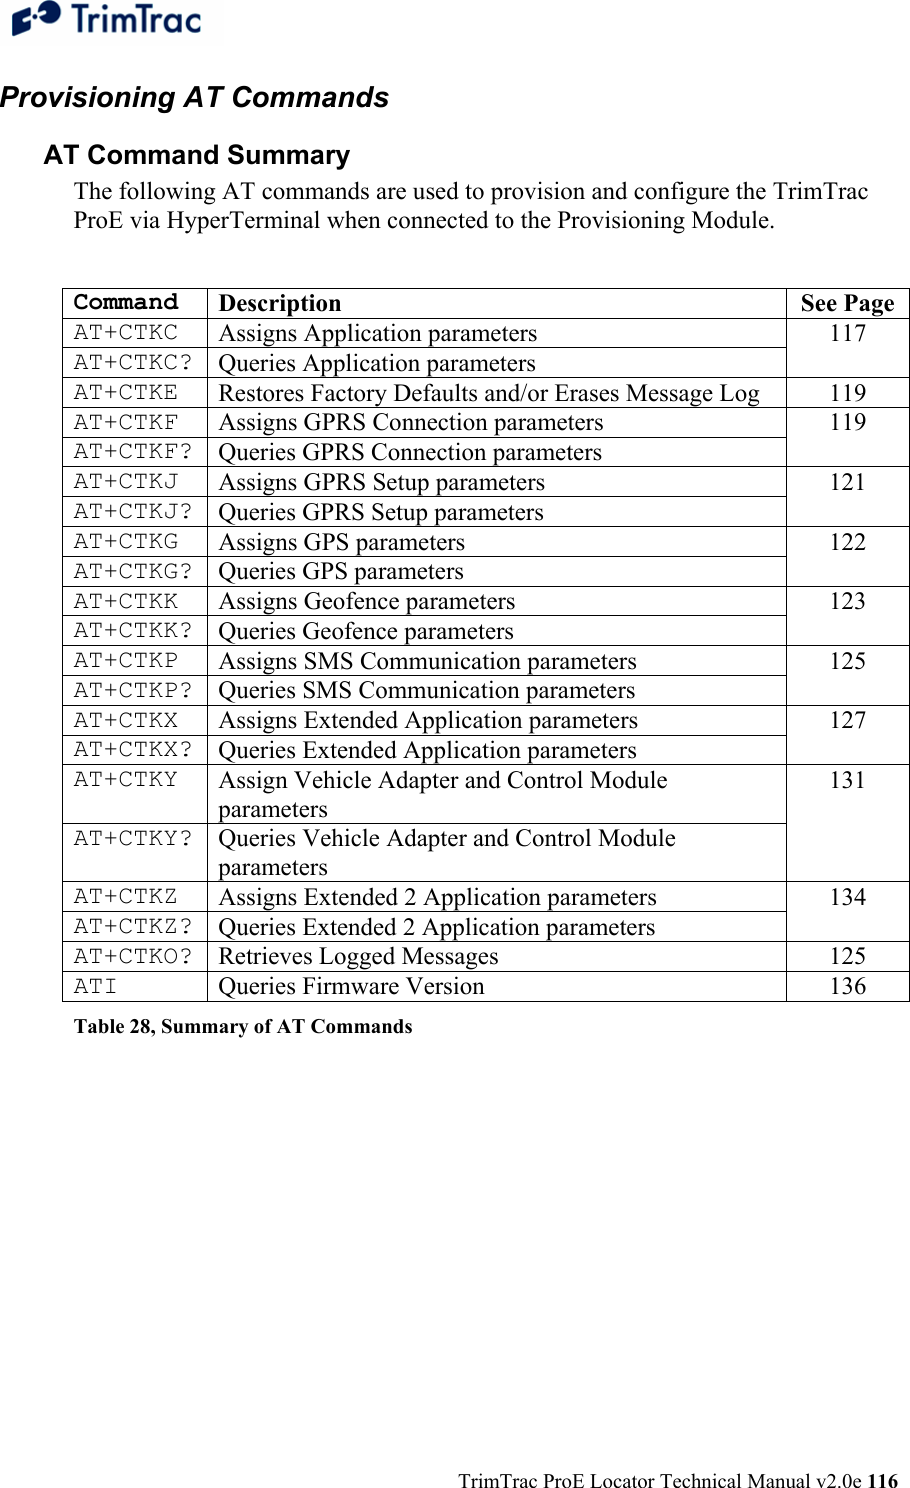  TrimTrac ProE Locator Technical Manual v2.0e 116 Provisioning AT Commands AT Command Summary  The following AT commands are used to provision and configure the TrimTrac ProE via HyperTerminal when connected to the Provisioning Module.  Command  Description See Page AT+CTKC  Assigns Application parameters AT+CTKC? Queries Application parameters 117  AT+CTKE  Restores Factory Defaults and/or Erases Message Log  119 AT+CTKF  Assigns GPRS Connection parameters AT+CTKF? Queries GPRS Connection parameters 119  AT+CTKJ  Assigns GPRS Setup parameters AT+CTKJ? Queries GPRS Setup parameters 121 AT+CTKG  Assigns GPS parameters AT+CTKG? Queries GPS parameters 122  AT+CTKK  Assigns Geofence parameters AT+CTKK? Queries Geofence parameters 123 AT+CTKP  Assigns SMS Communication parameters AT+CTKP? Queries SMS Communication parameters 125 AT+CTKX  Assigns Extended Application parameters AT+CTKX? Queries Extended Application parameters 127  AT+CTKY  Assign Vehicle Adapter and Control Module parameters AT+CTKY? Queries Vehicle Adapter and Control Module parameters 131  AT+CTKZ  Assigns Extended 2 Application parameters AT+CTKZ? Queries Extended 2 Application parameters 134 AT+CTKO? Retrieves Logged Messages  125 ATI  Queries Firmware Version  136 Table 28, Summary of AT Commands 